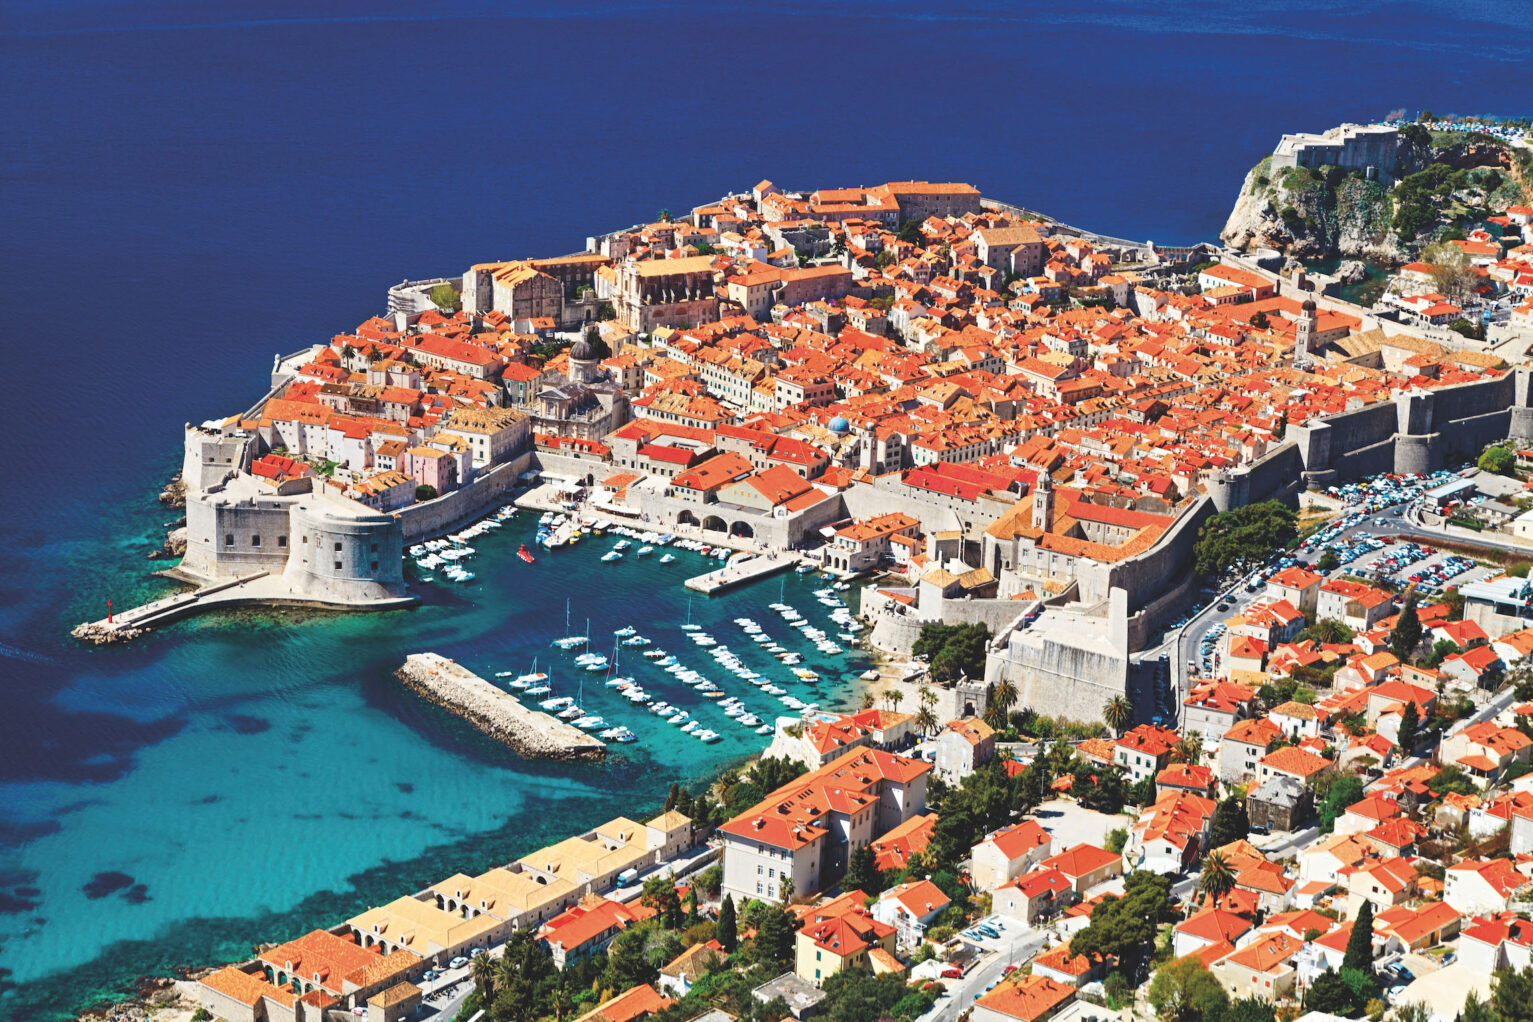 Aerial view of the Old Town Dubrovnik, Croatia